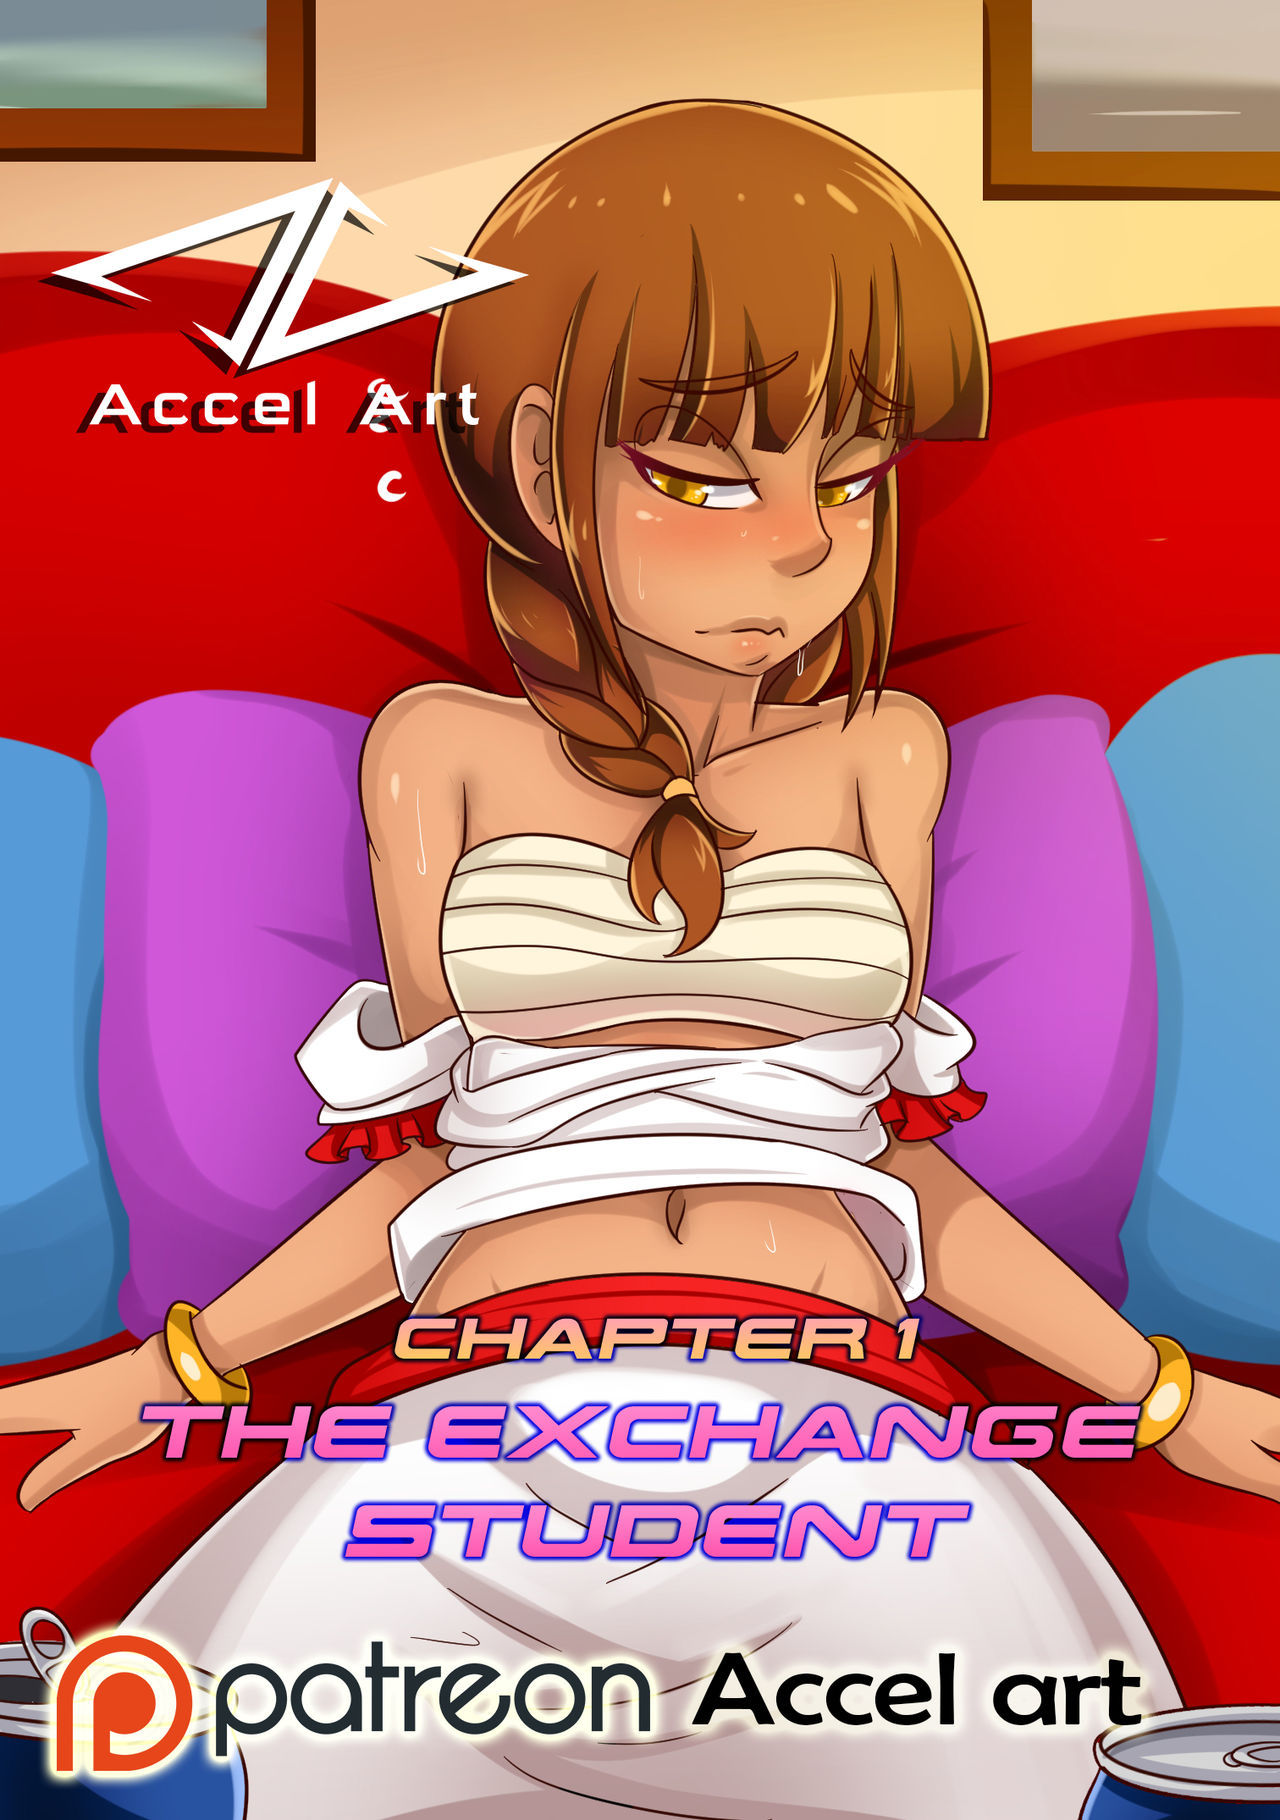 Axi-Stories---The-Exchange-Student-02.jpg